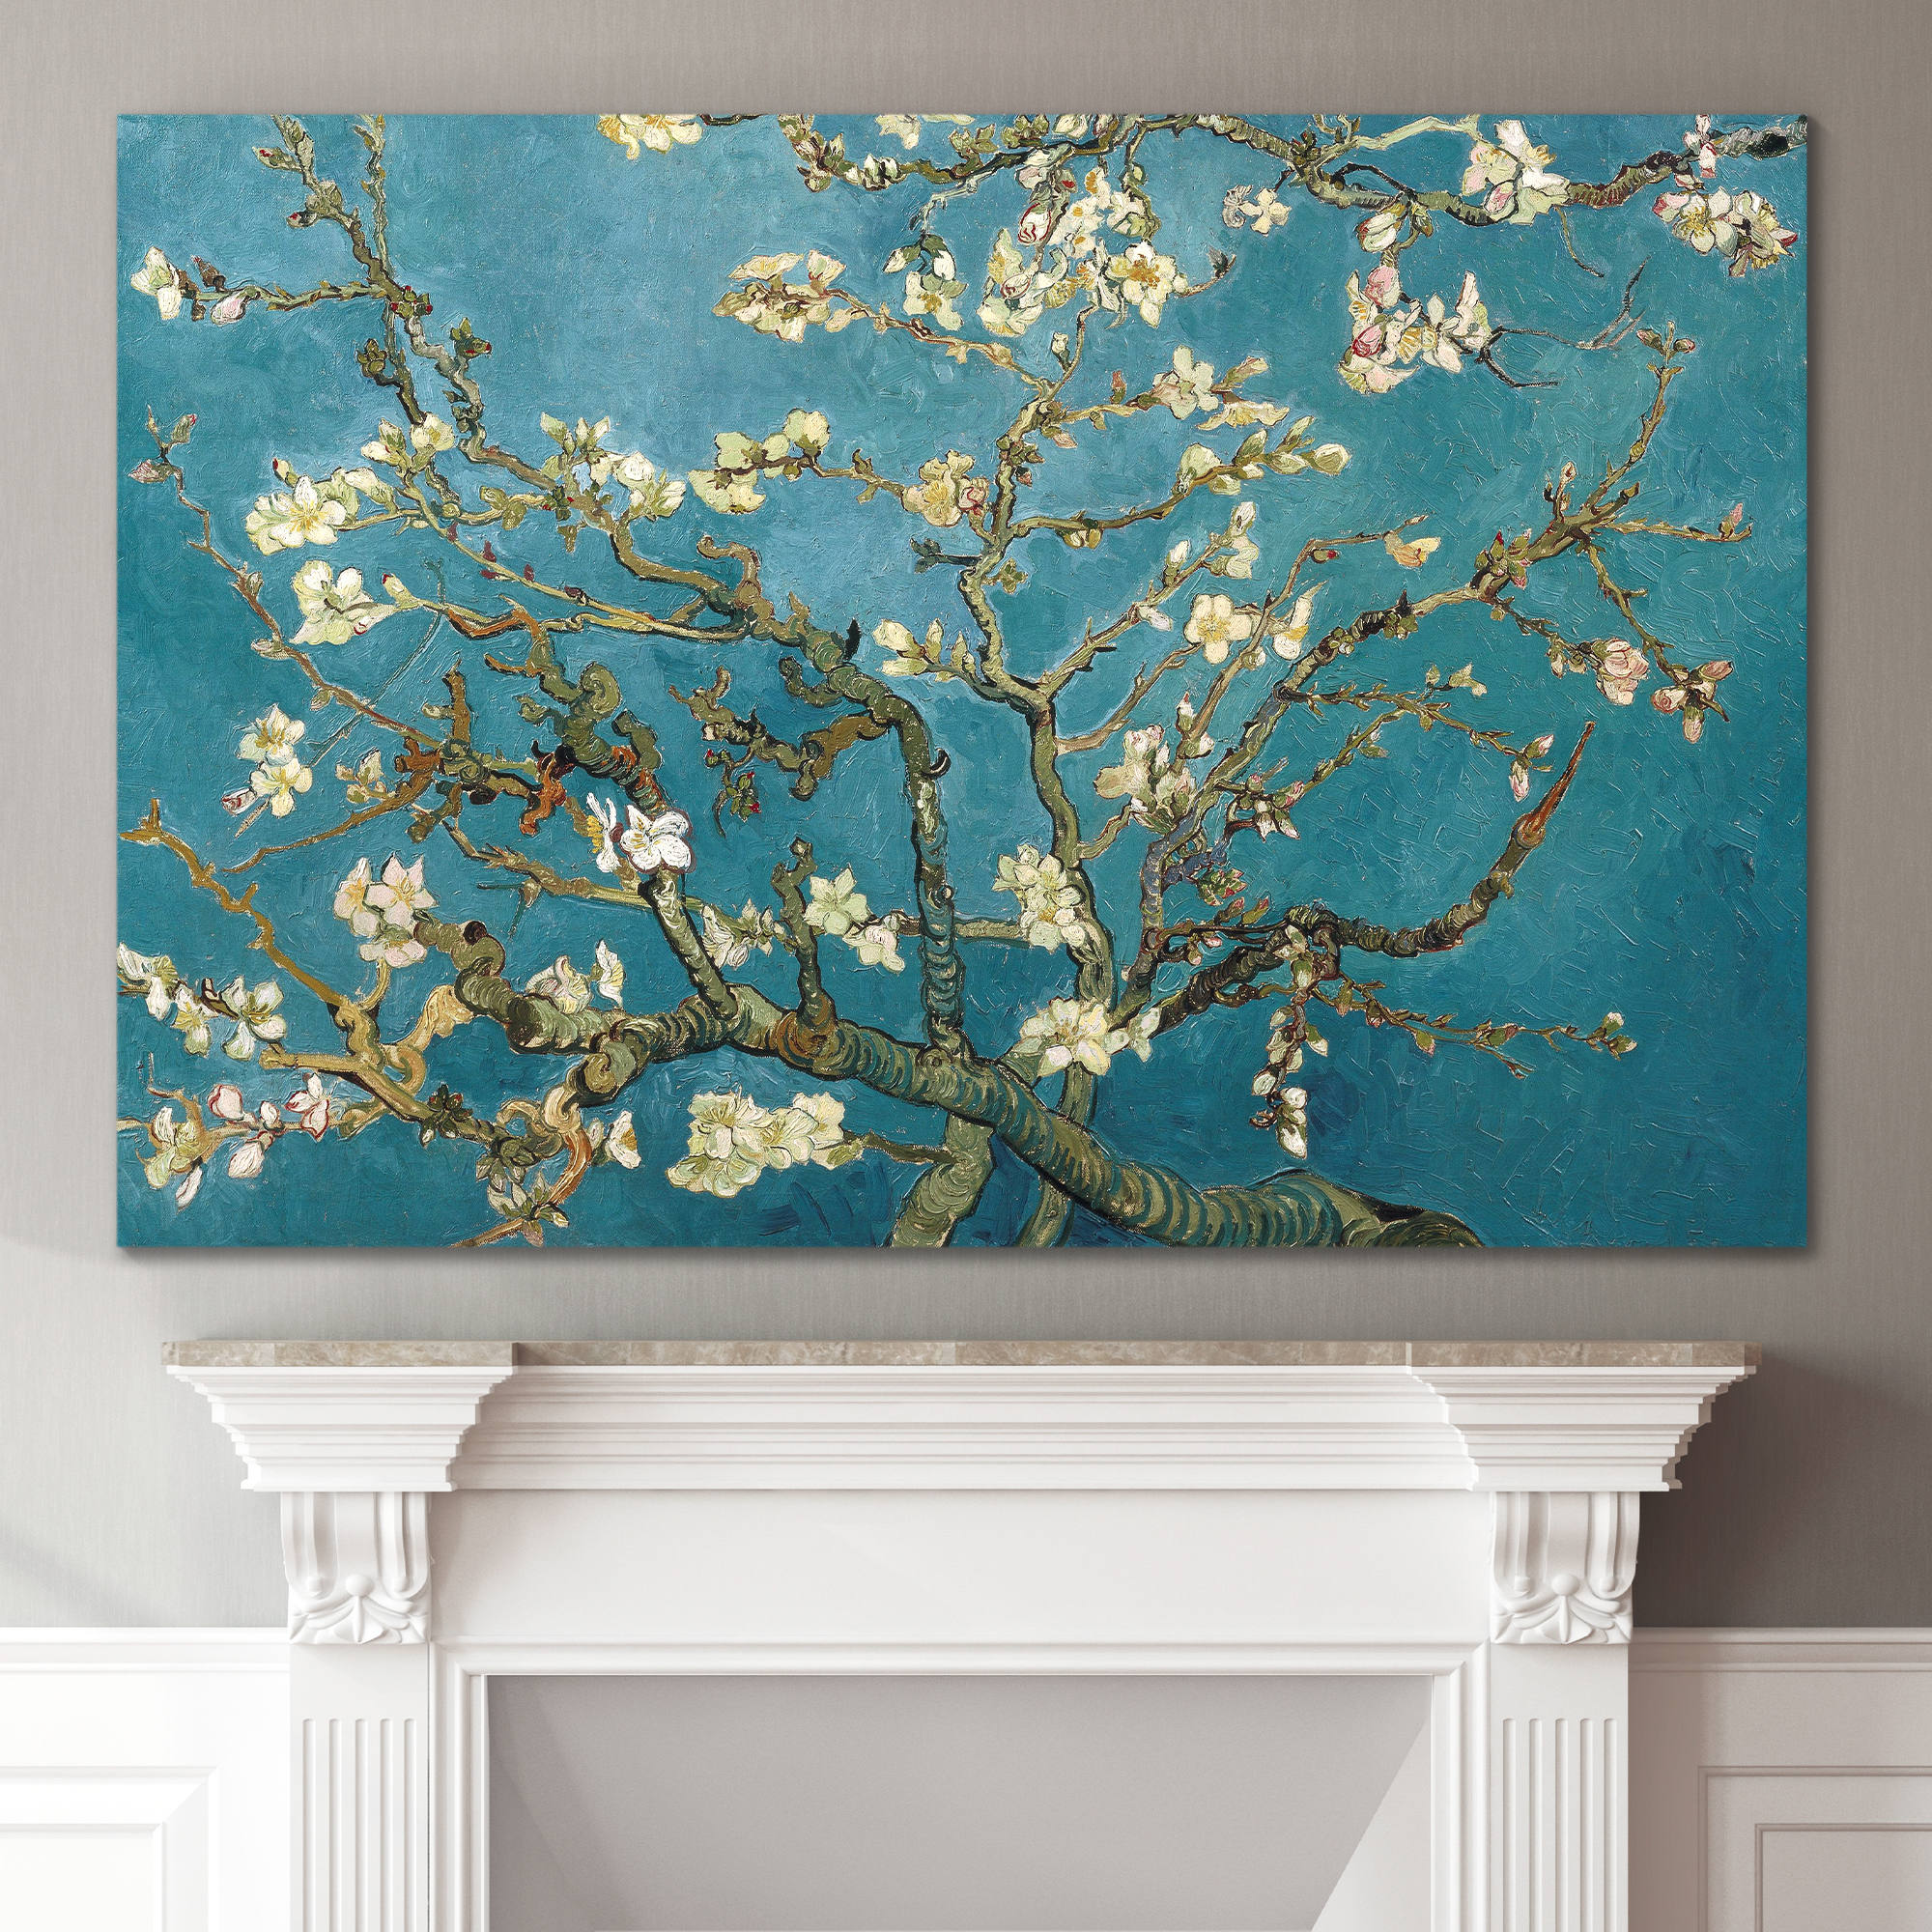 Canvas Print Wall Art - Almond Blossoms by Vincent Van Gogh Reproduction on Canvas Stretched Gallery Wrap. Ready to Hang - 12